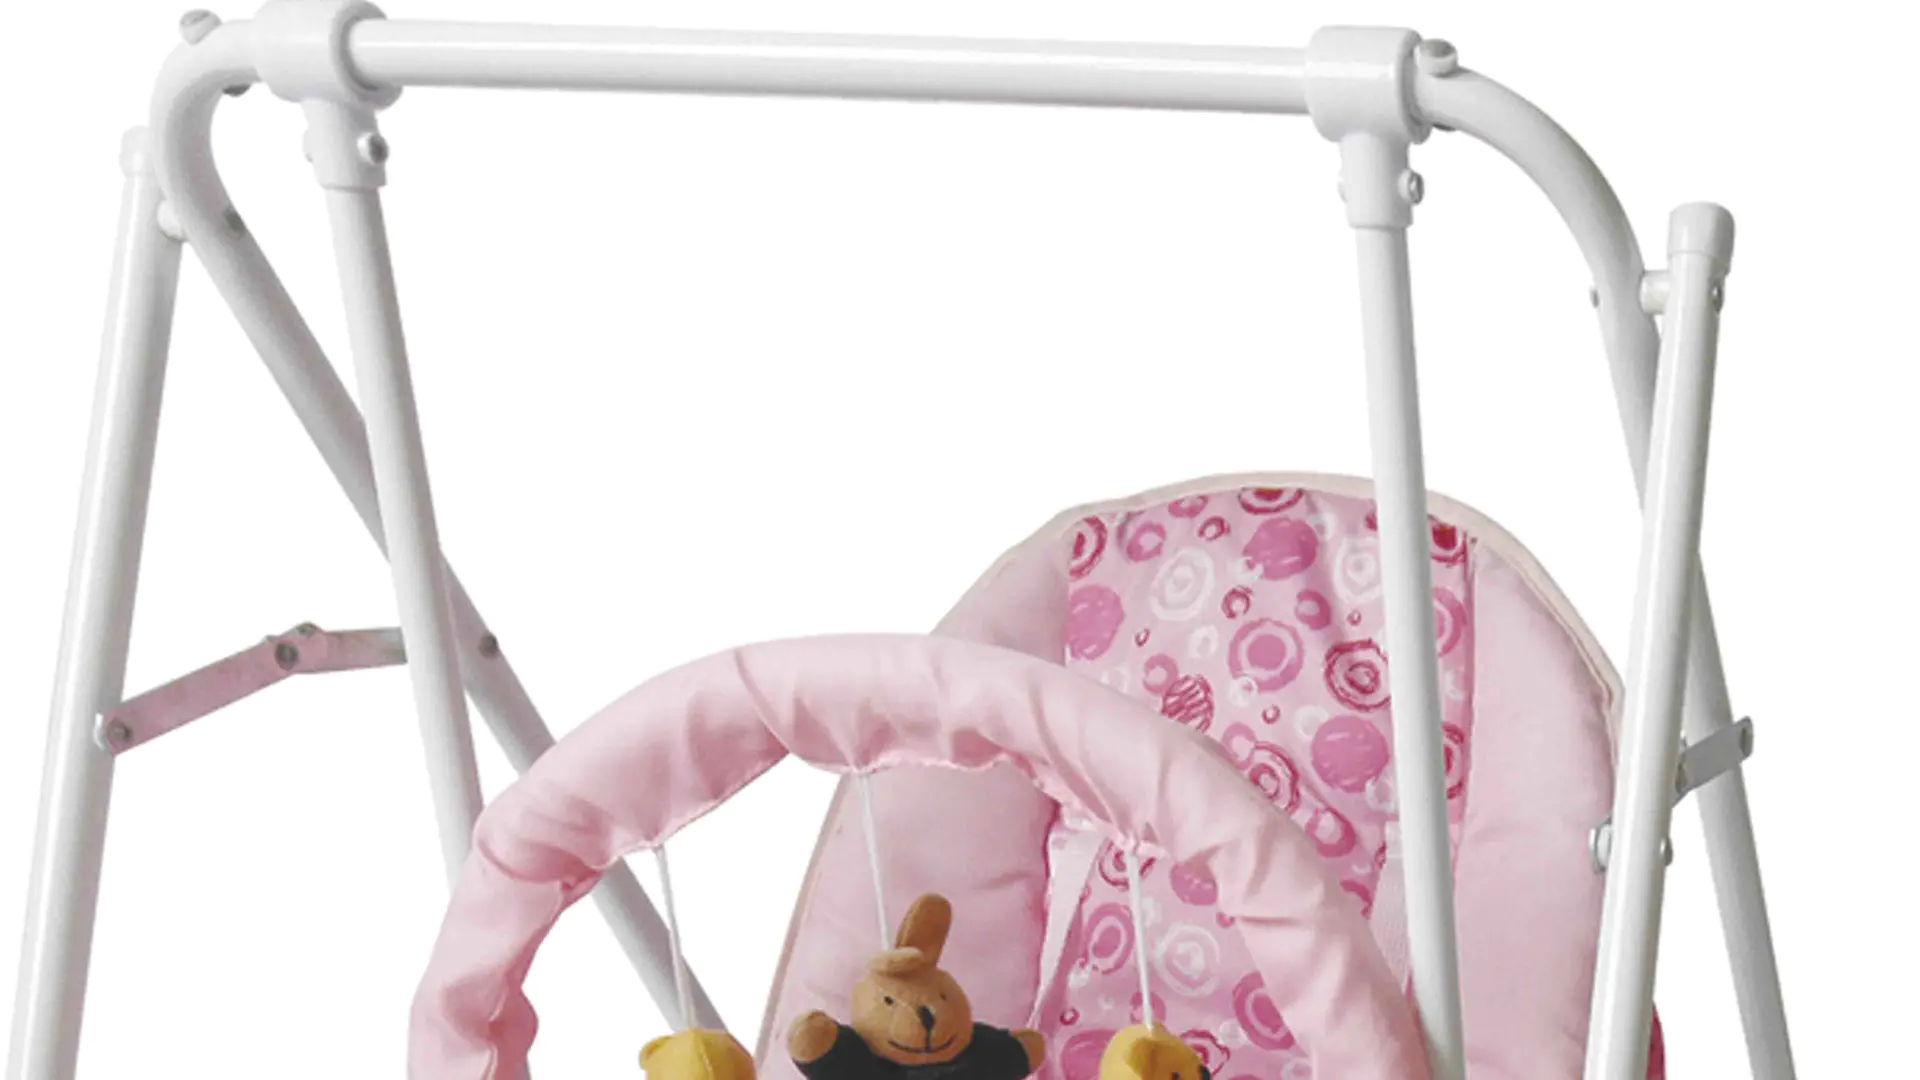 Aoqi cheap baby swings for sale with good price for babys room